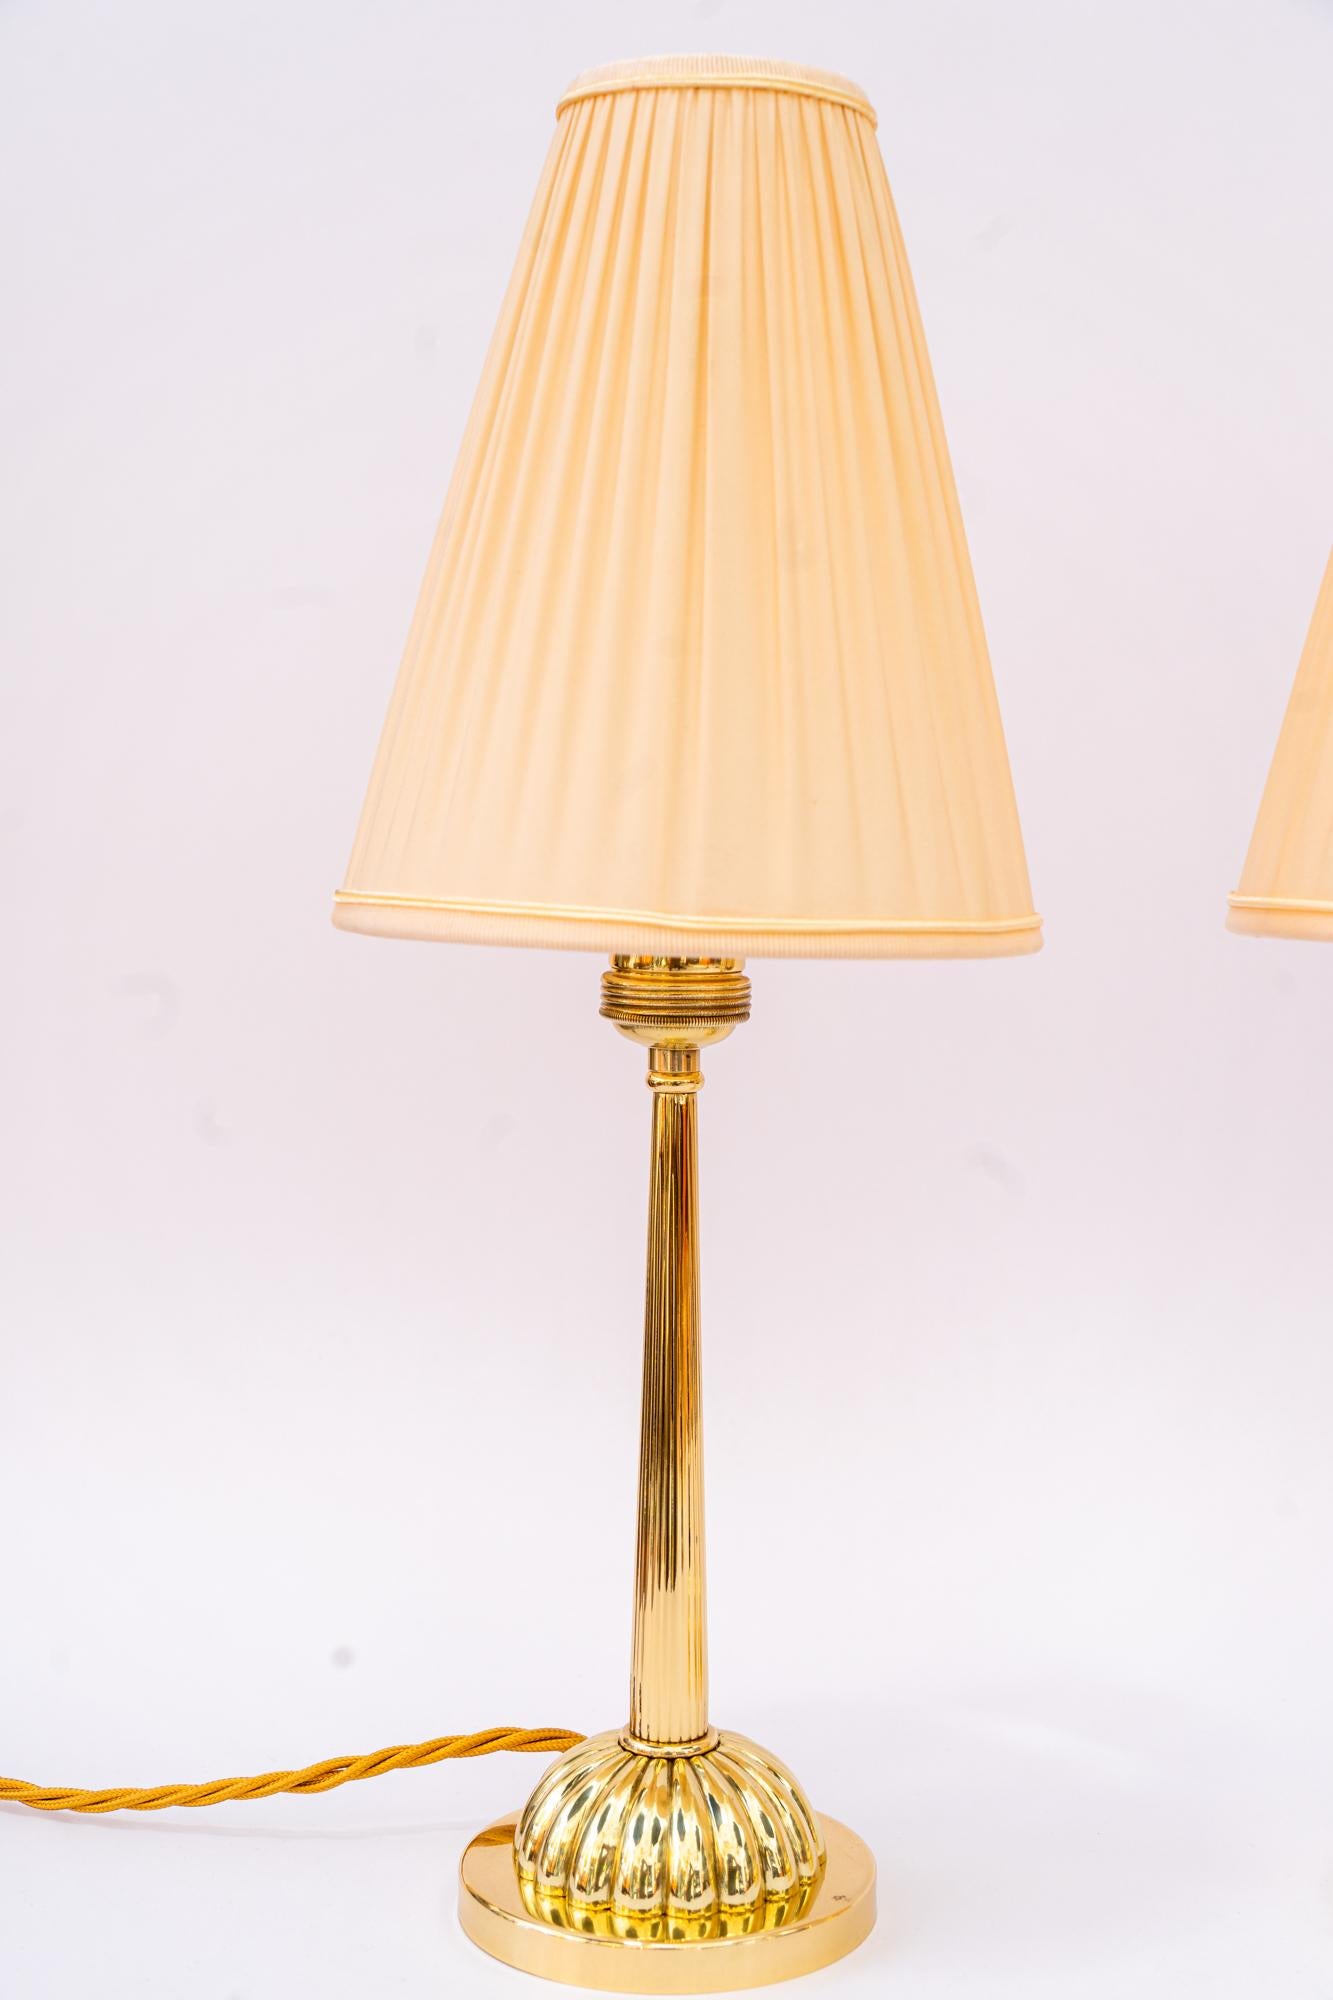 2 Art Deco Table lamp with fabric shades vienna 1920
Brass polished and stove enameled 
The shades are replaced ( new )
